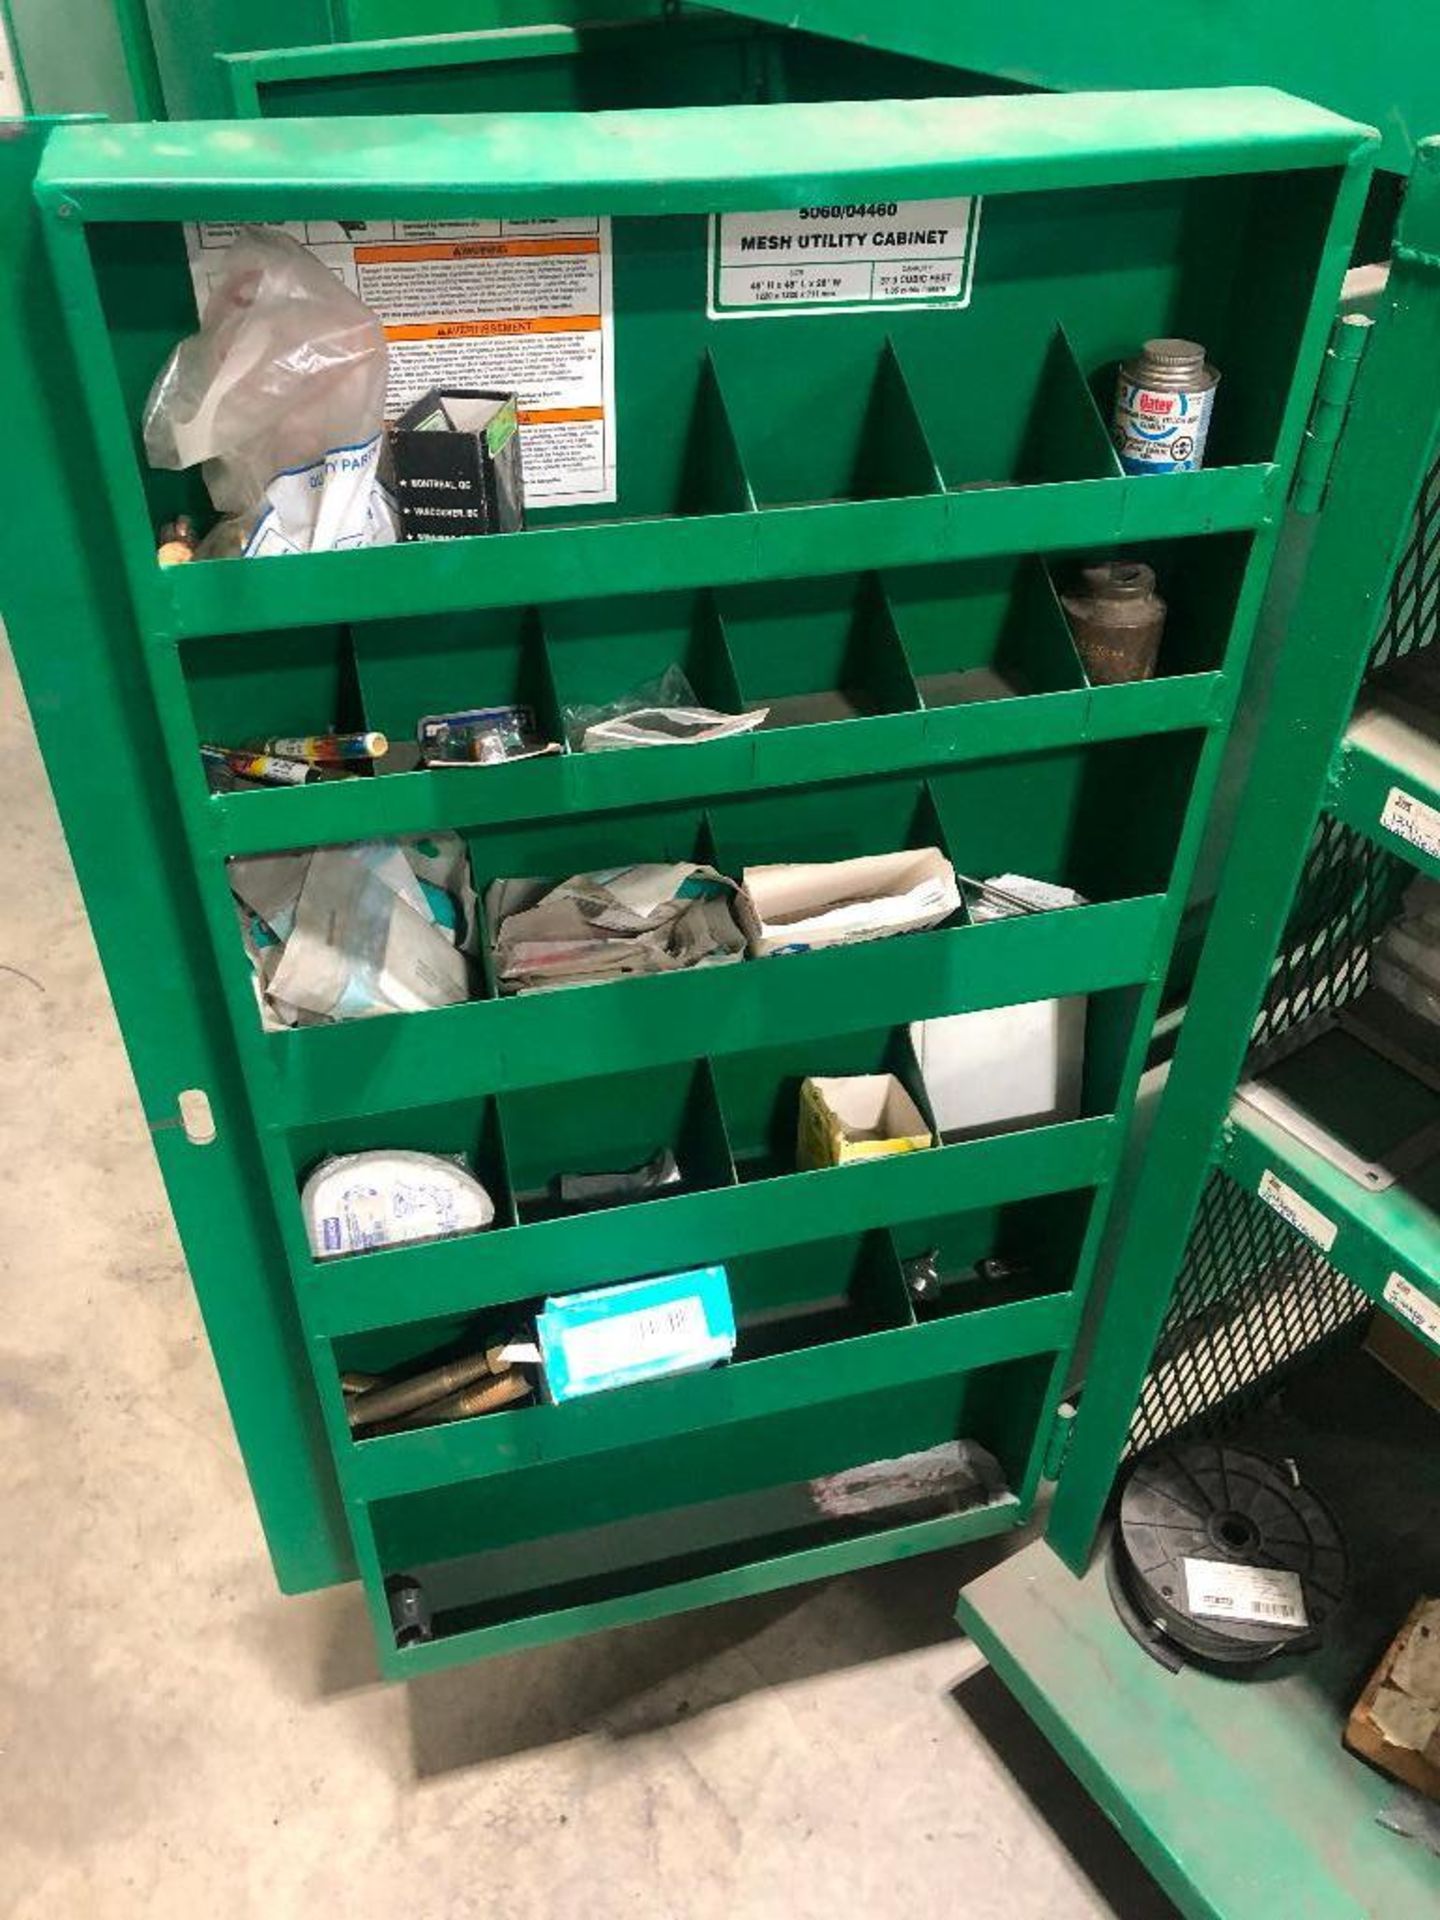 Greenlee Mesh Utility Cabinet w/ Asst. Contents including Hard Hats, First Aid Kit, etc. - Image 3 of 5